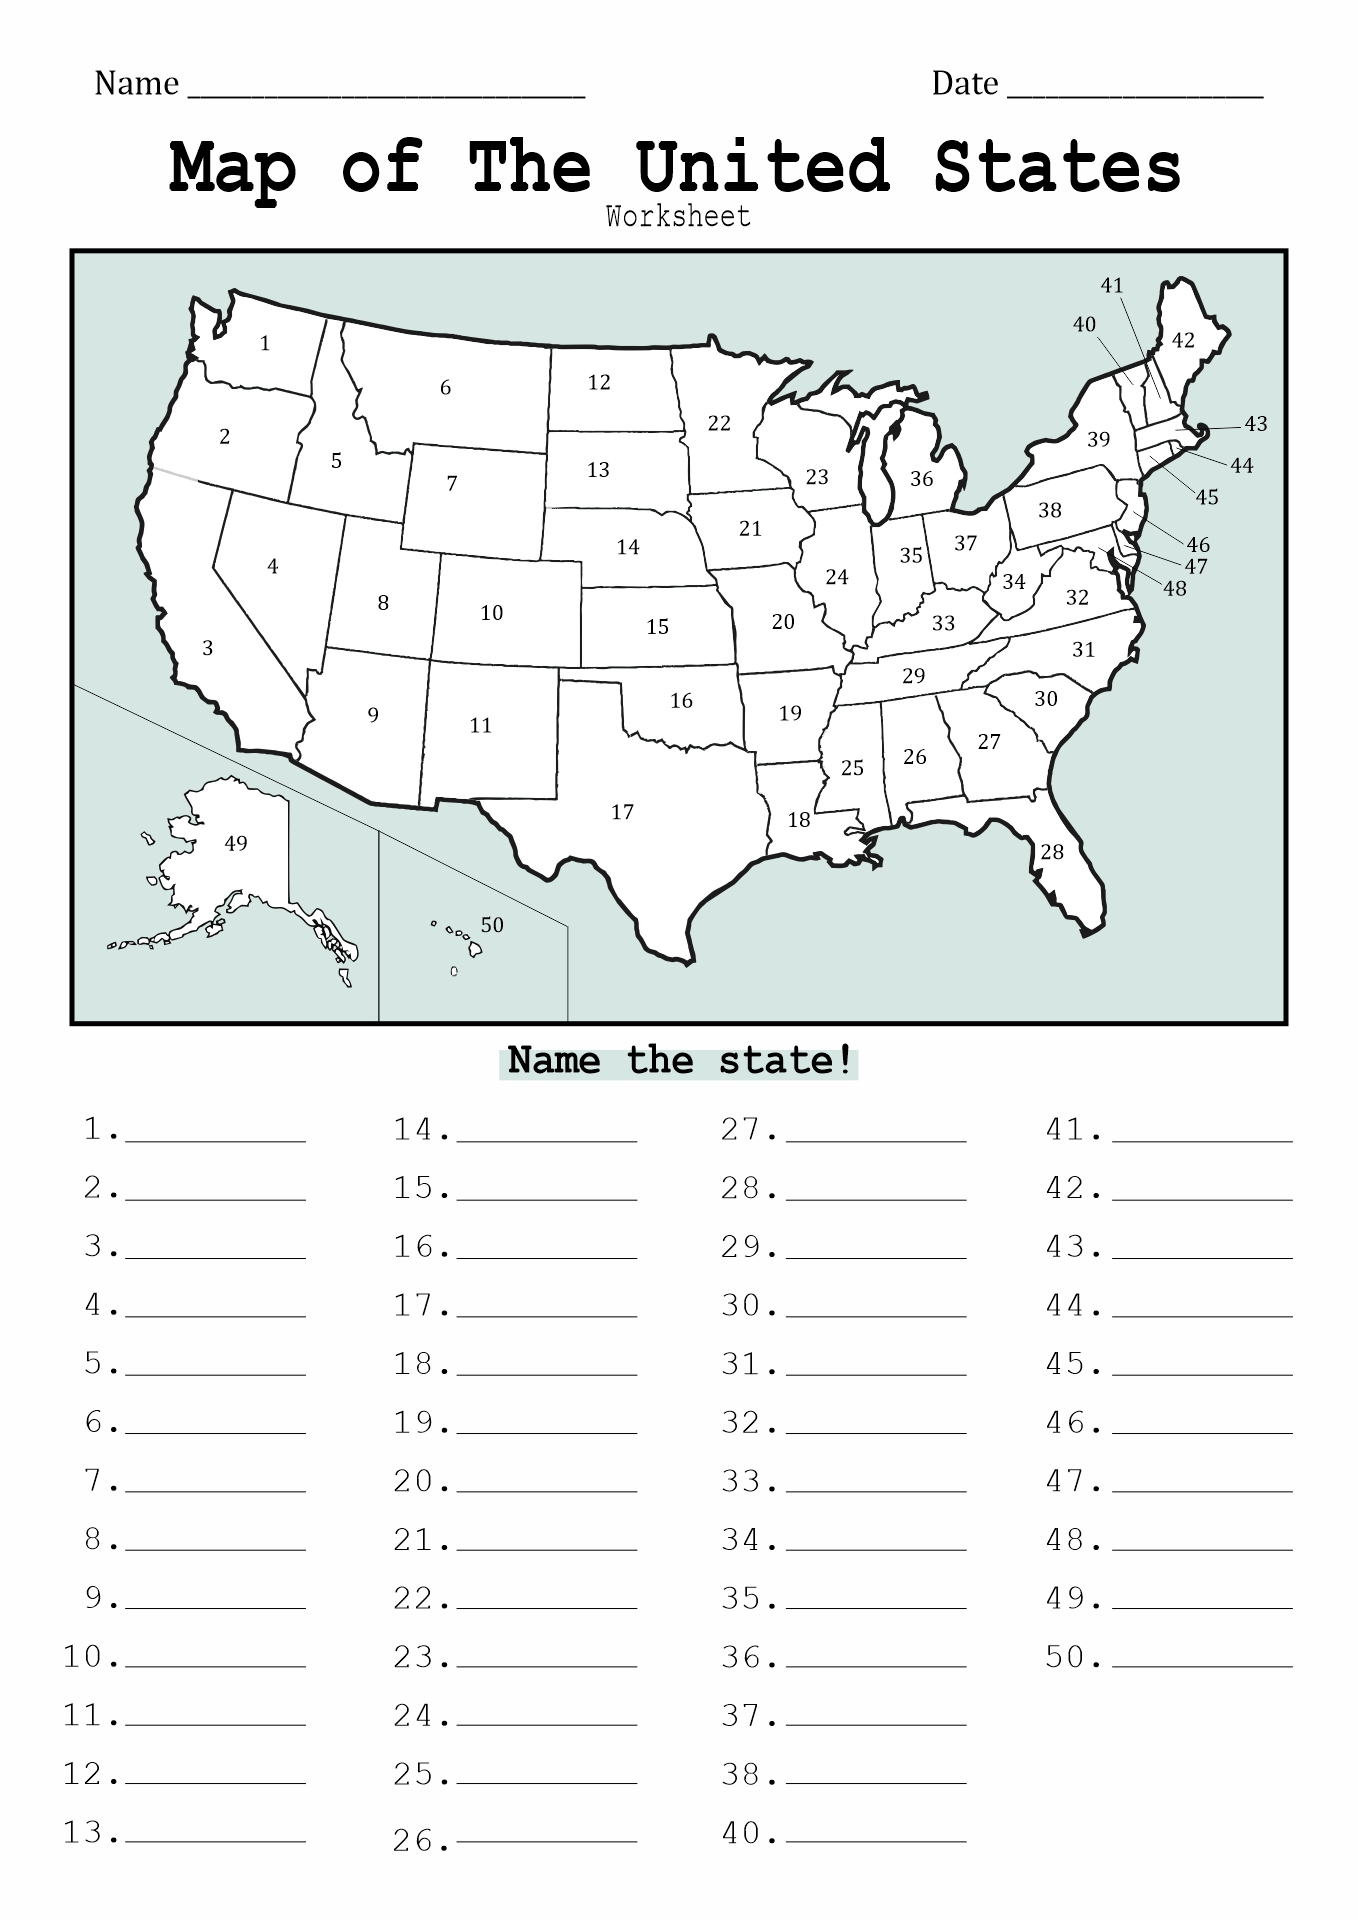 50-states-and-capitals-printable-worksheets